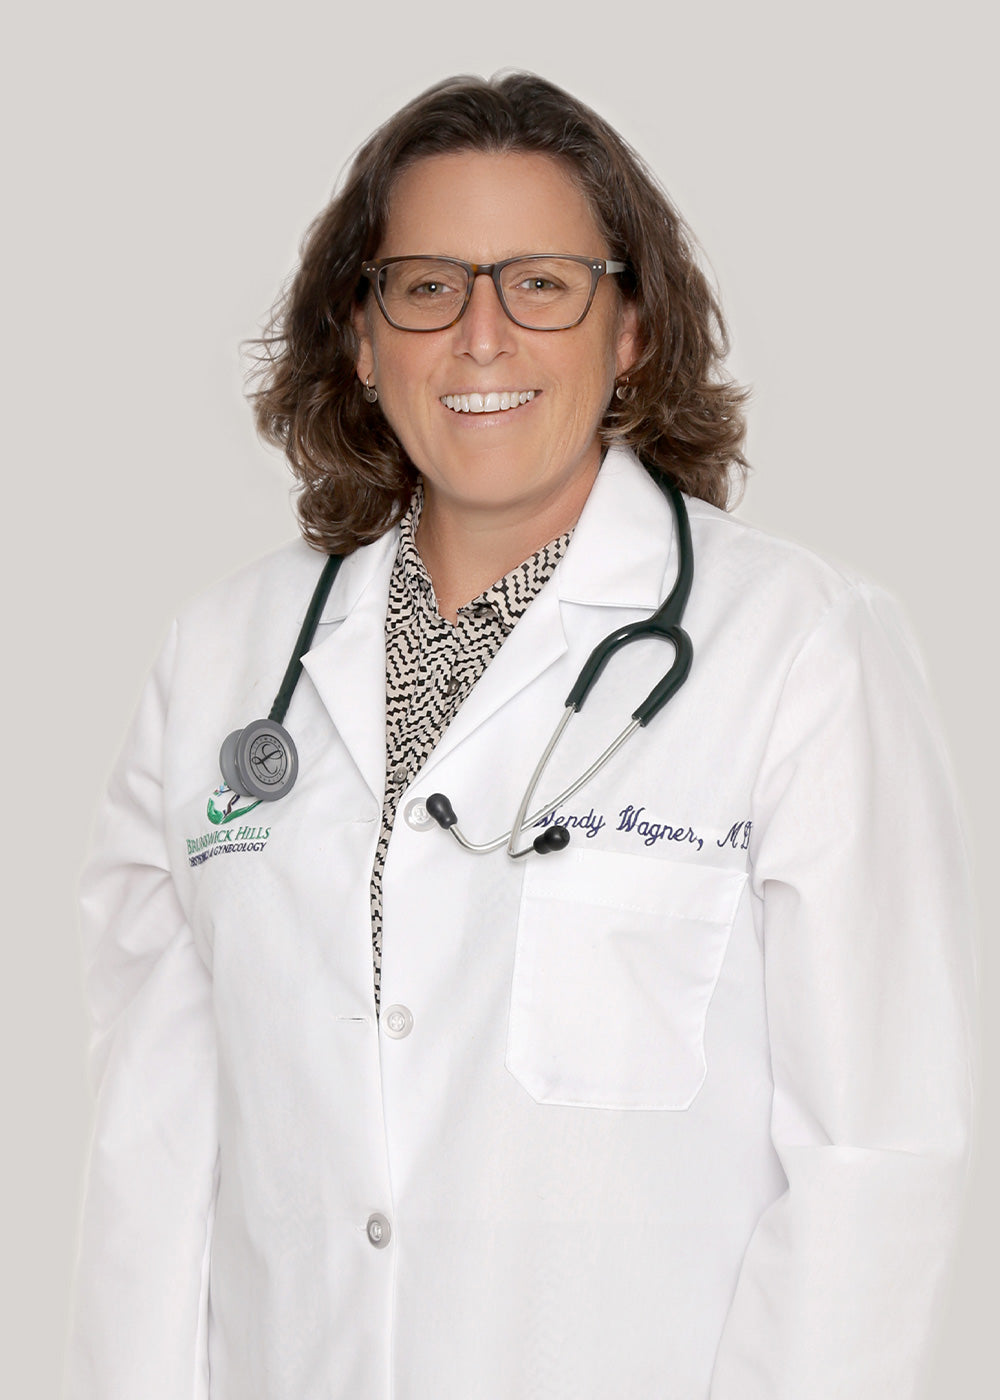 
                  Dr. Wendy Wagner
                